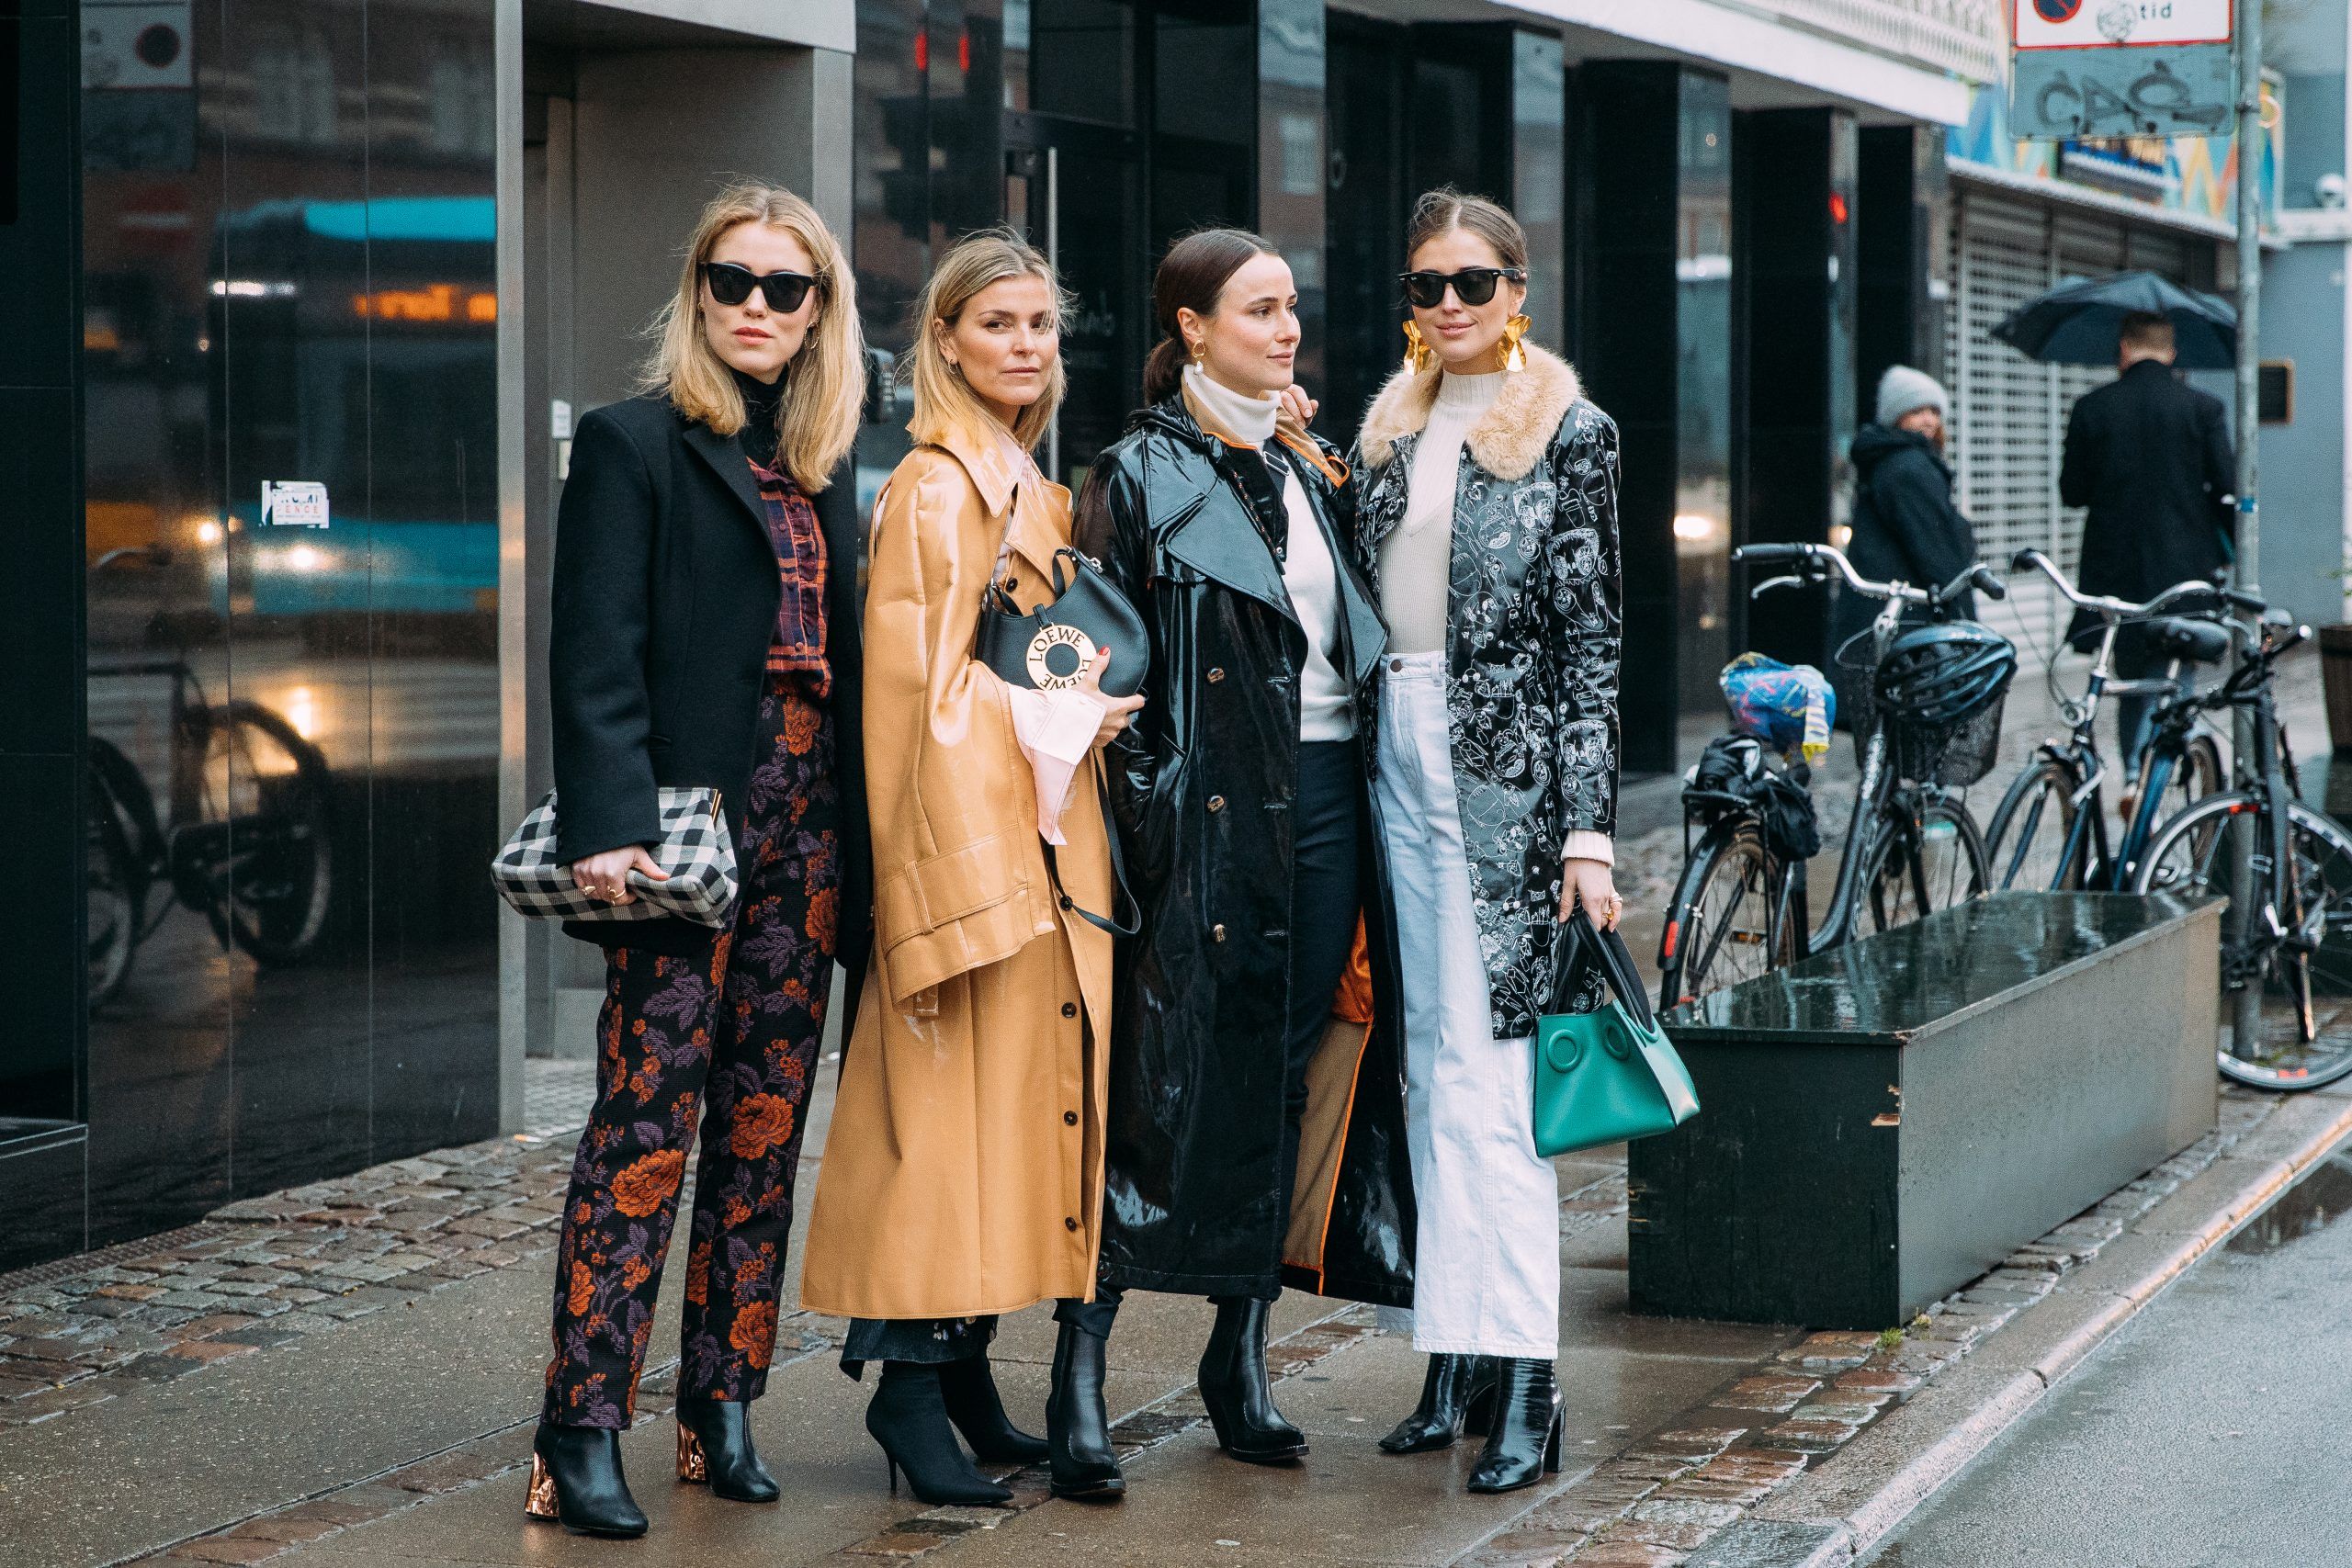 Staying warm and stylish in the Copenhagen winter